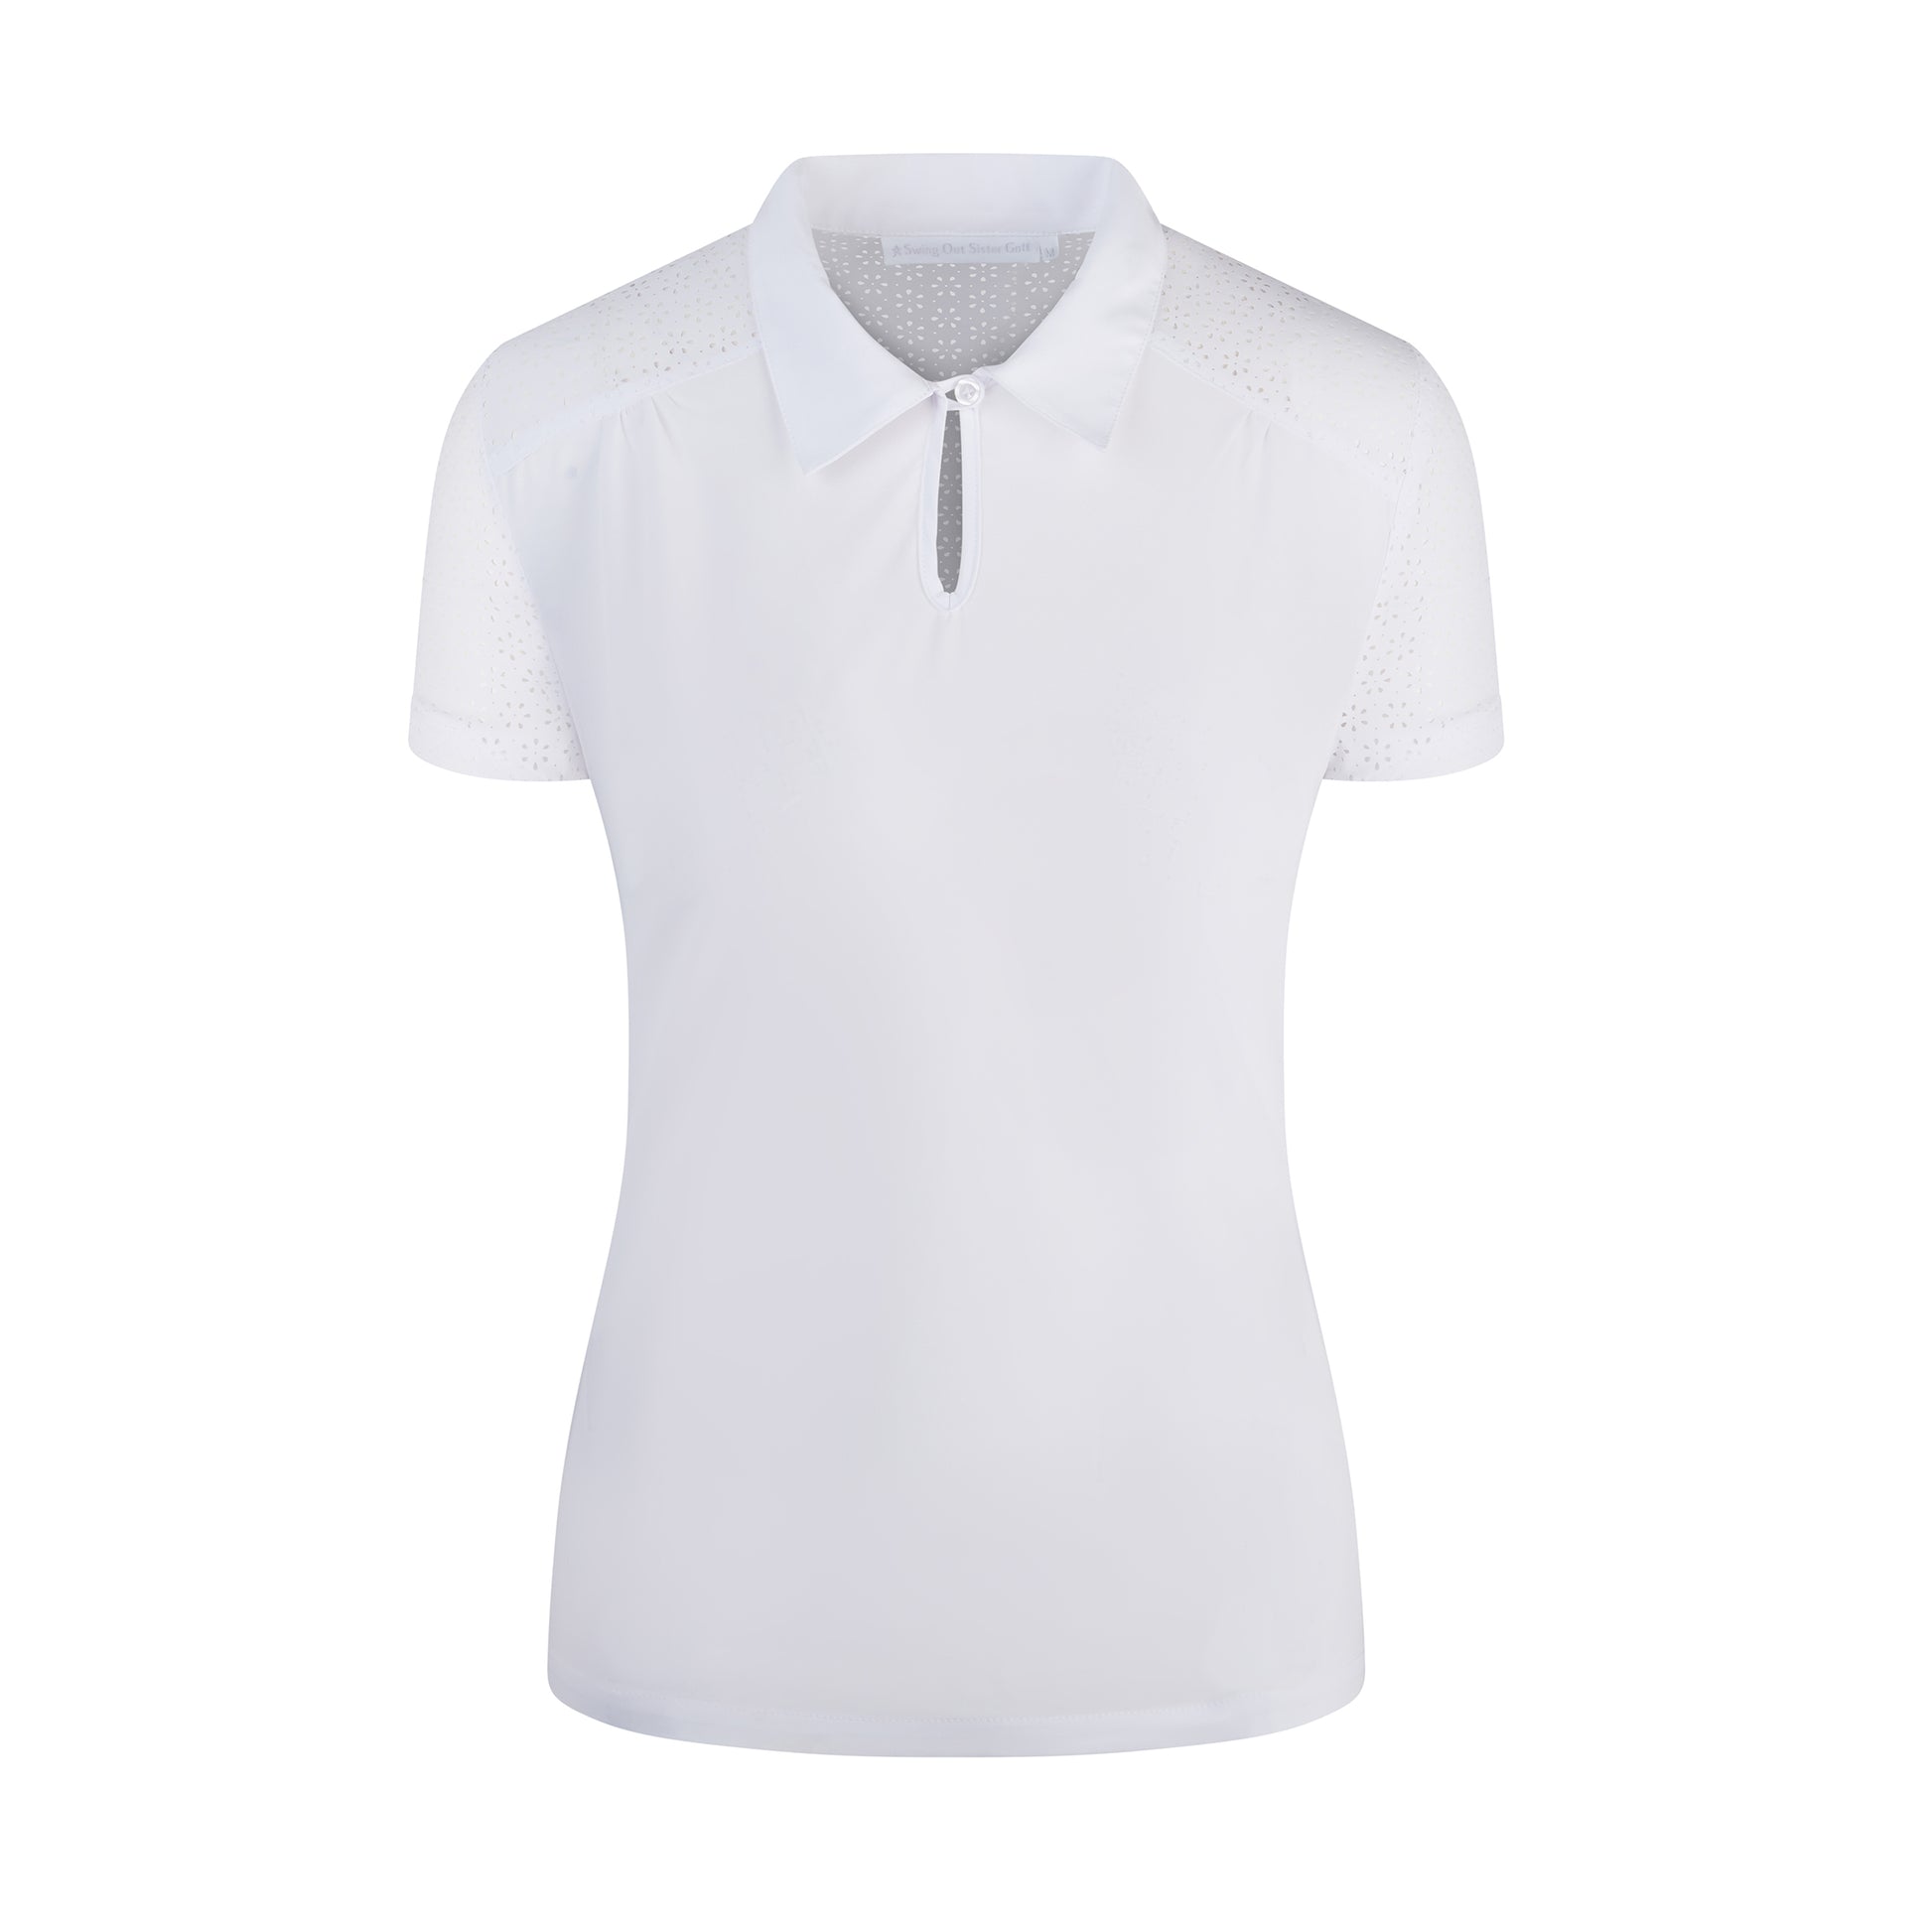 Swing Out Sister Ladies Laser Print Cap Sleeve Polo in Optic White